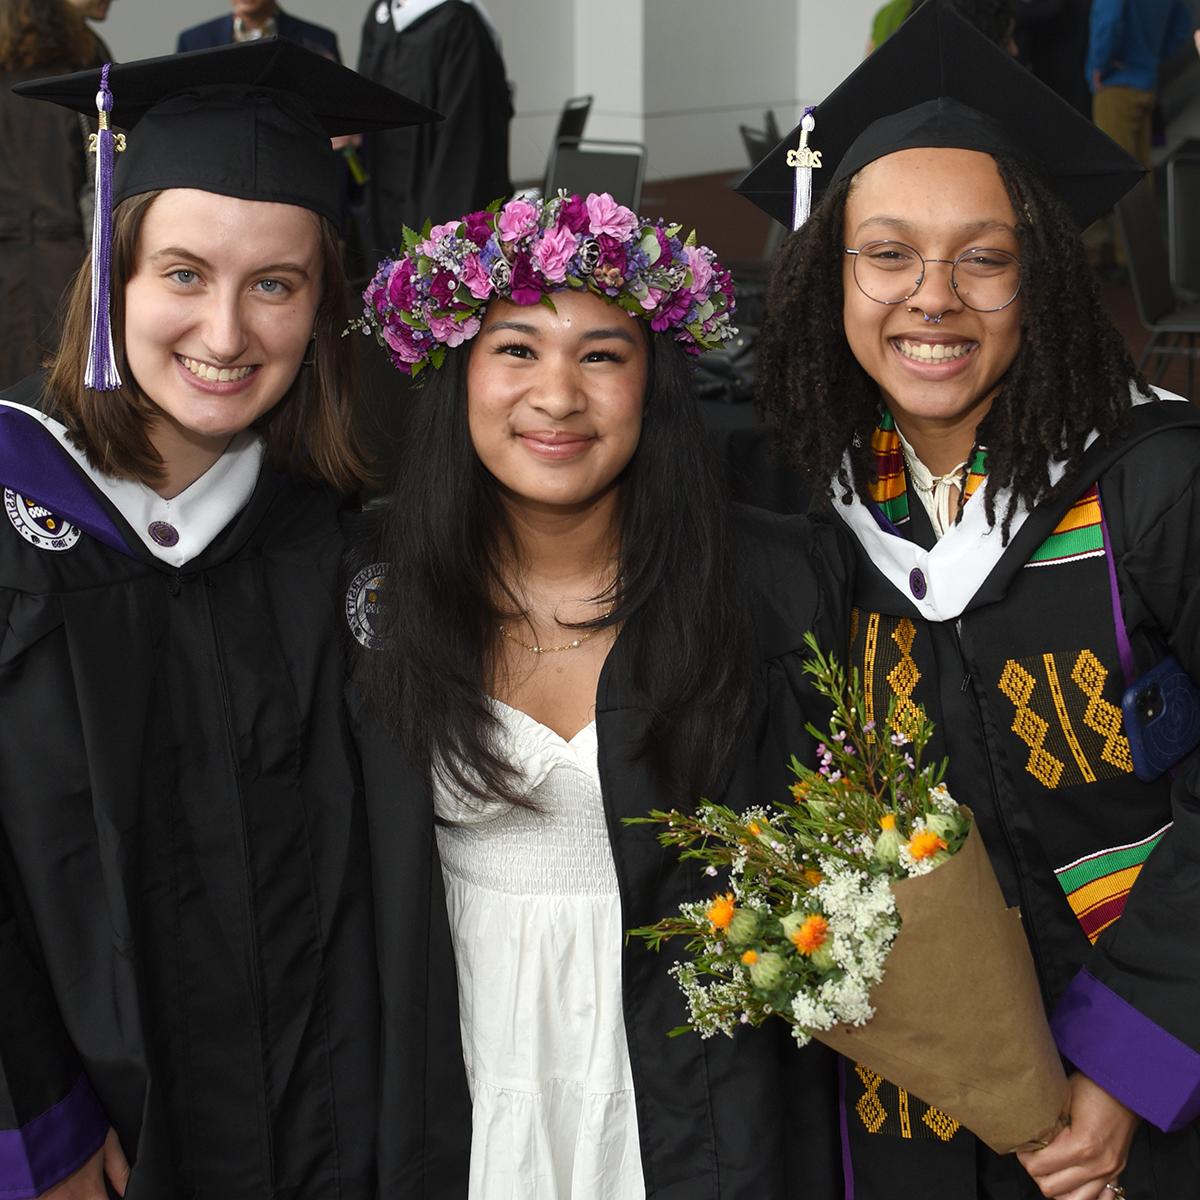 Three graduating students in robes, two in traditional caps and one wearing a beautiful flower crown, pose for a photo